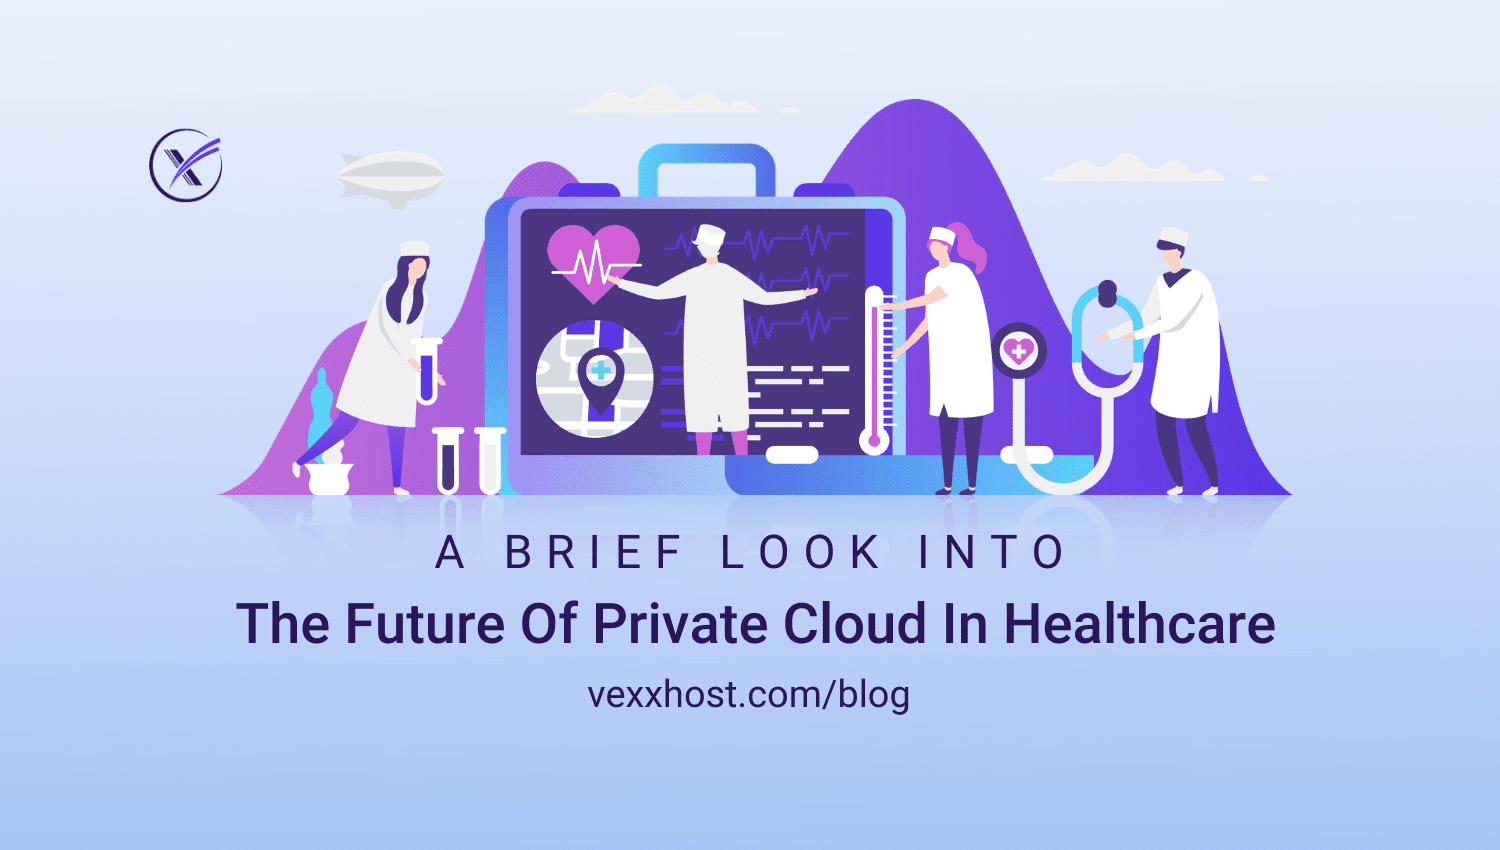 A Brief Look into the Future of Private Cloud in Healthcare